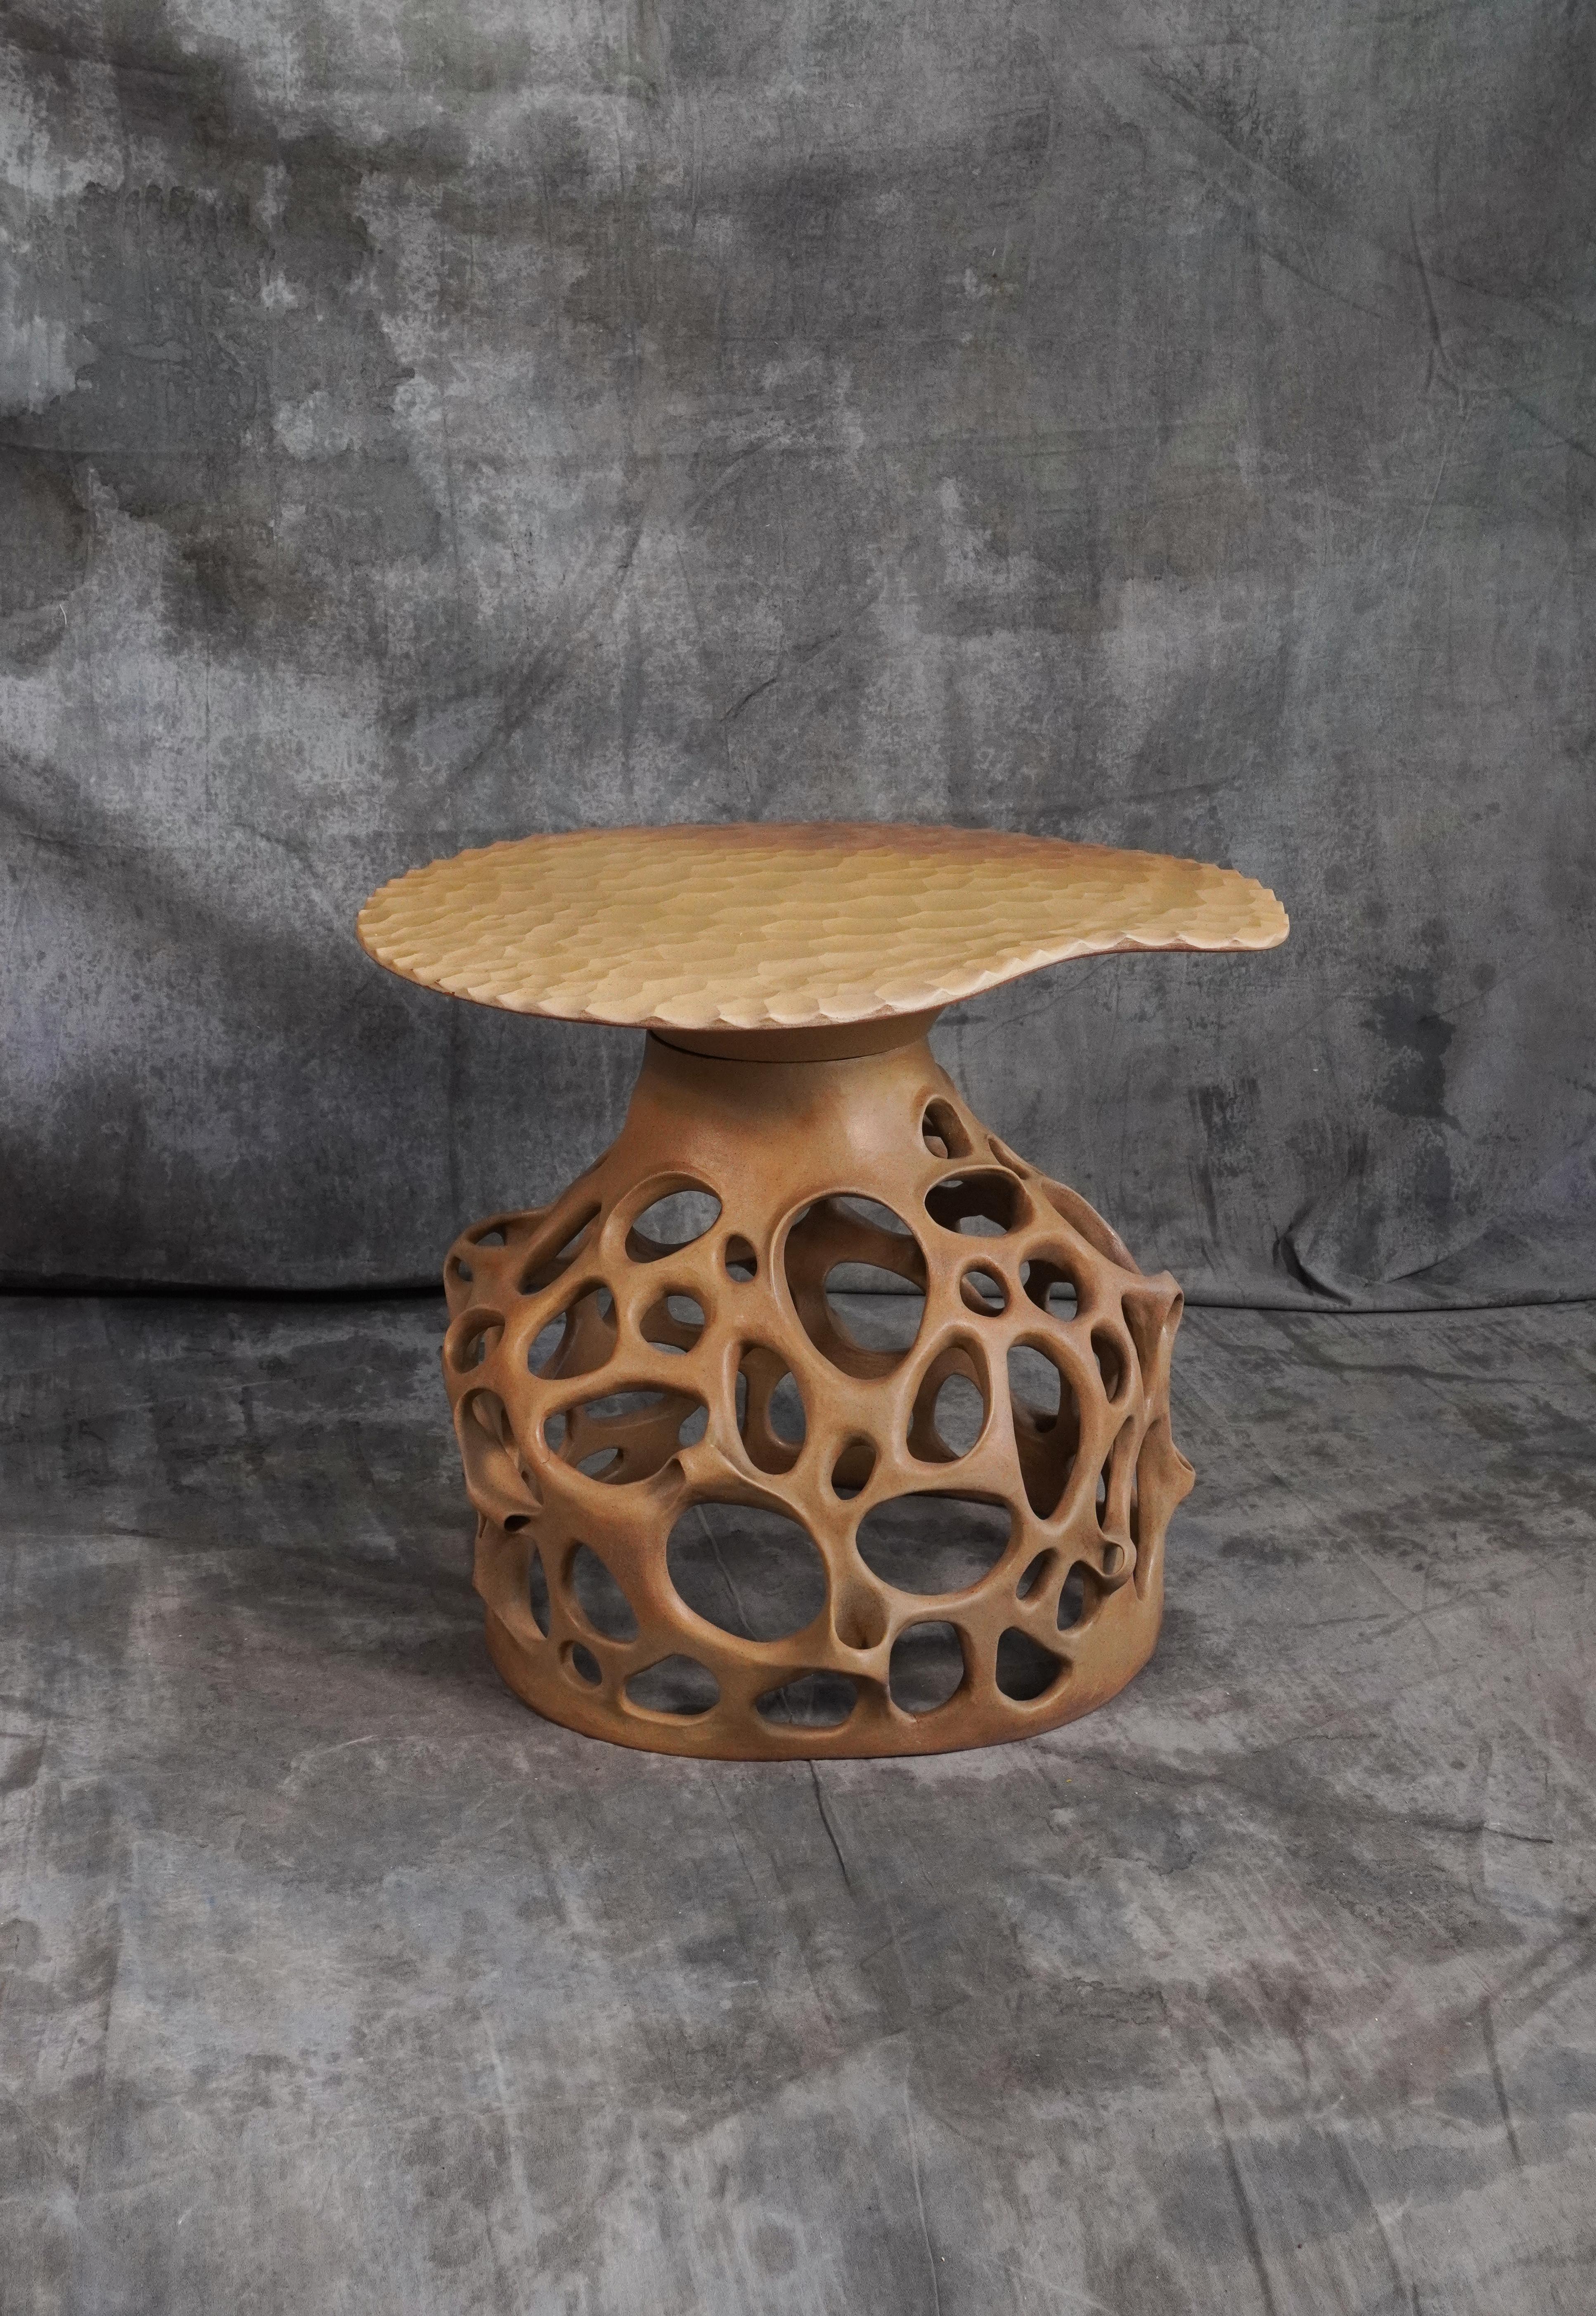 Unique Side Table Fungi Handmade by Jan Ernst
Dimensions: L 40 x H 45 cm
Materials: Terracotta

Other dimensions available, please contact us.
Glazed to client specification.

The Origin Collection is a collaboration between Jan Ernst and Colin